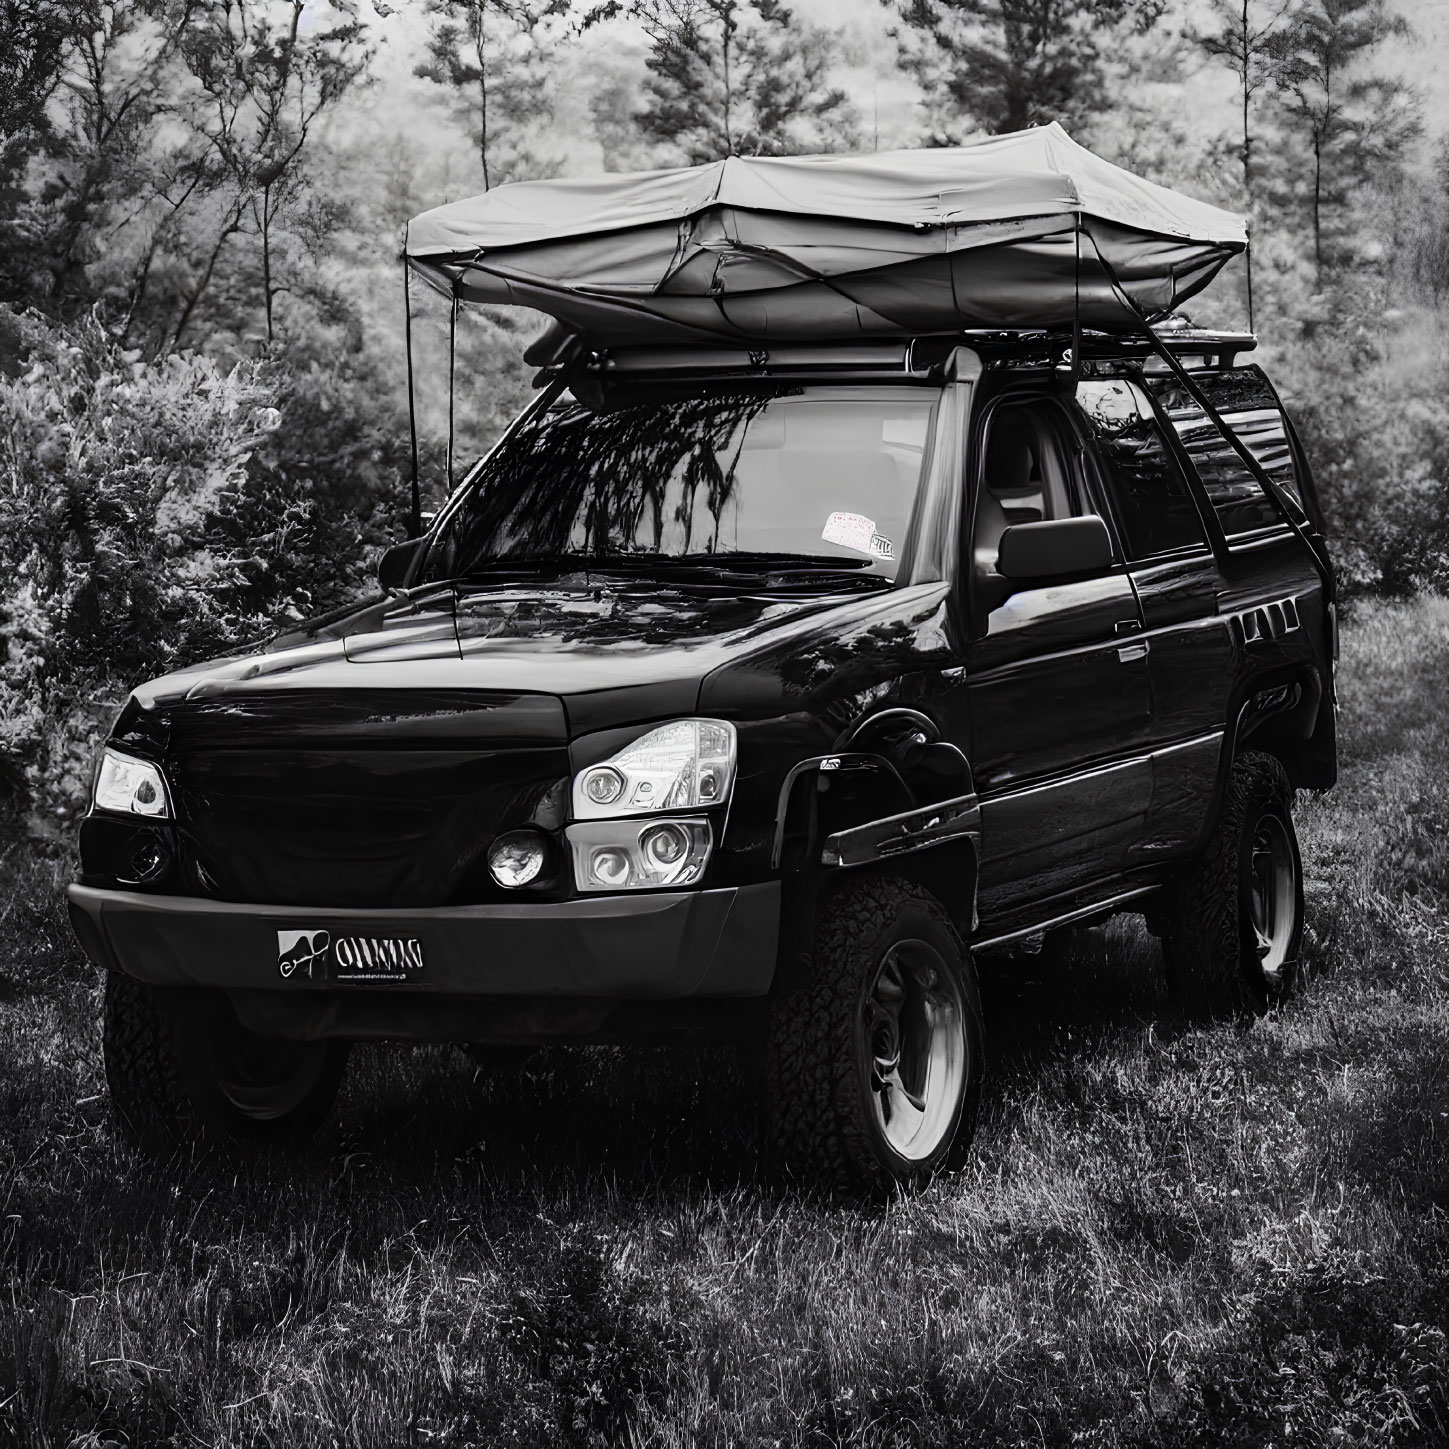 Black off-road vehicle with roof-top tent in forested area for outdoor adventure.